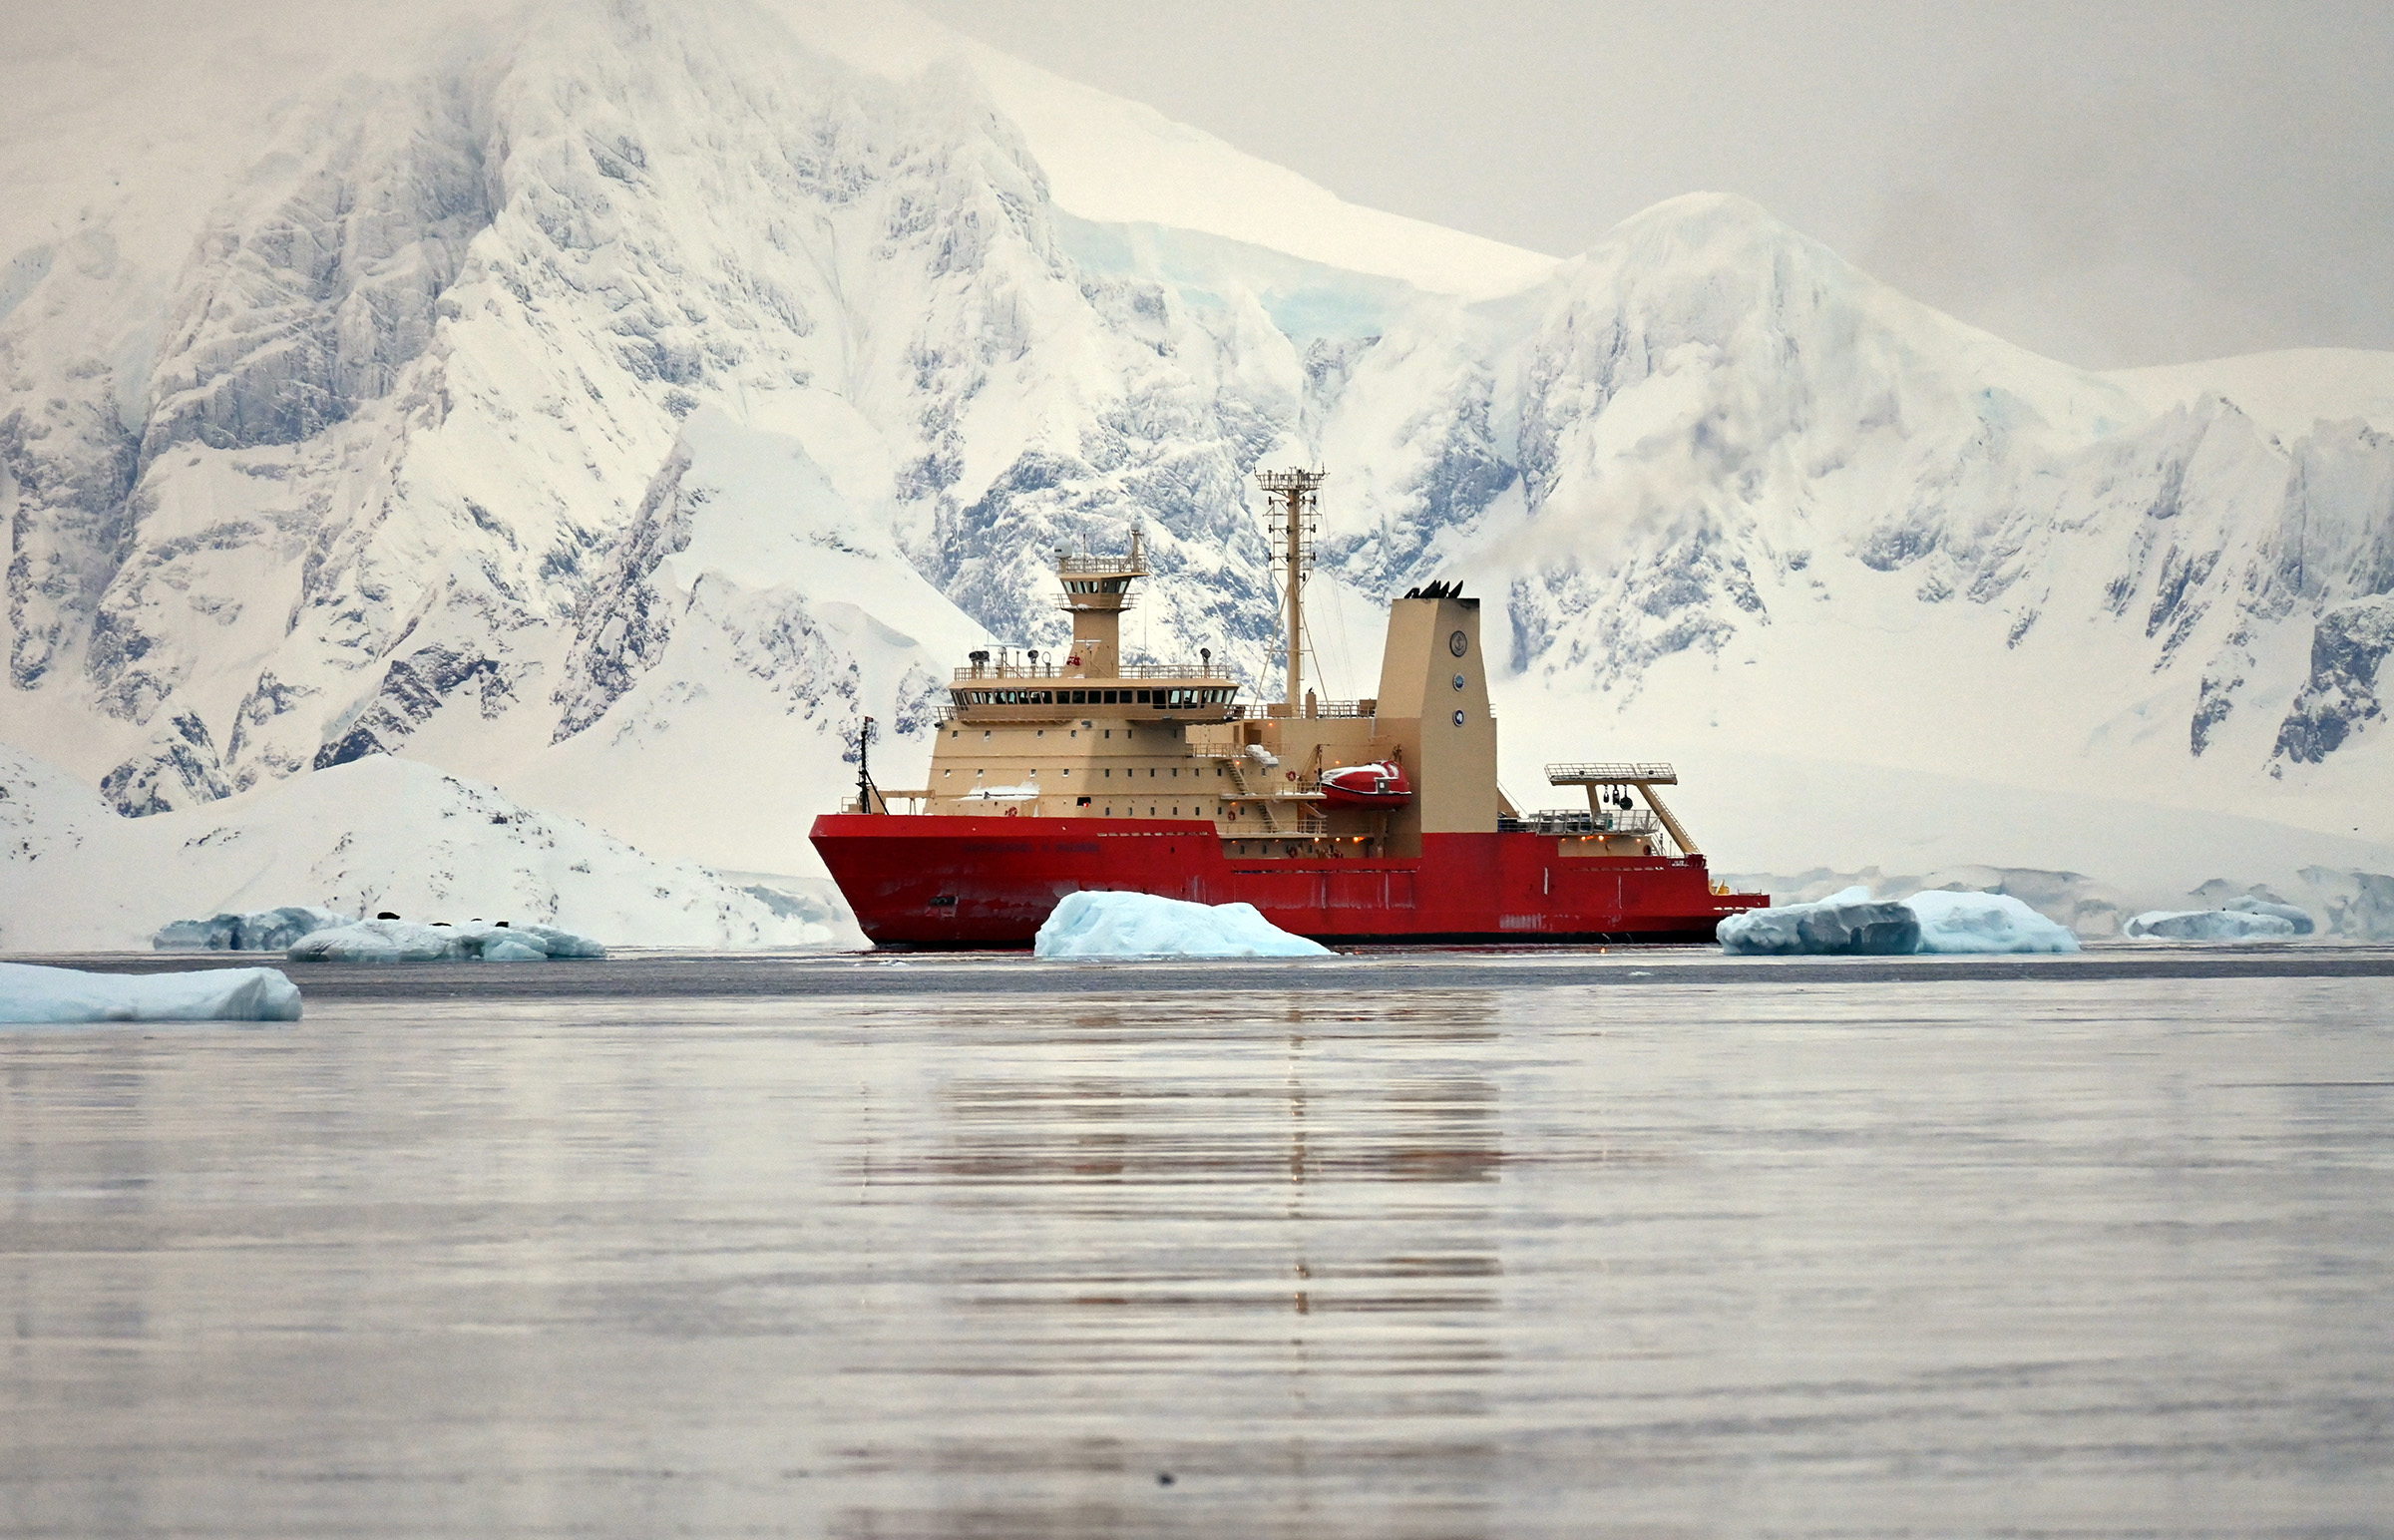 An orange and gold ship by snow-covered mountains.